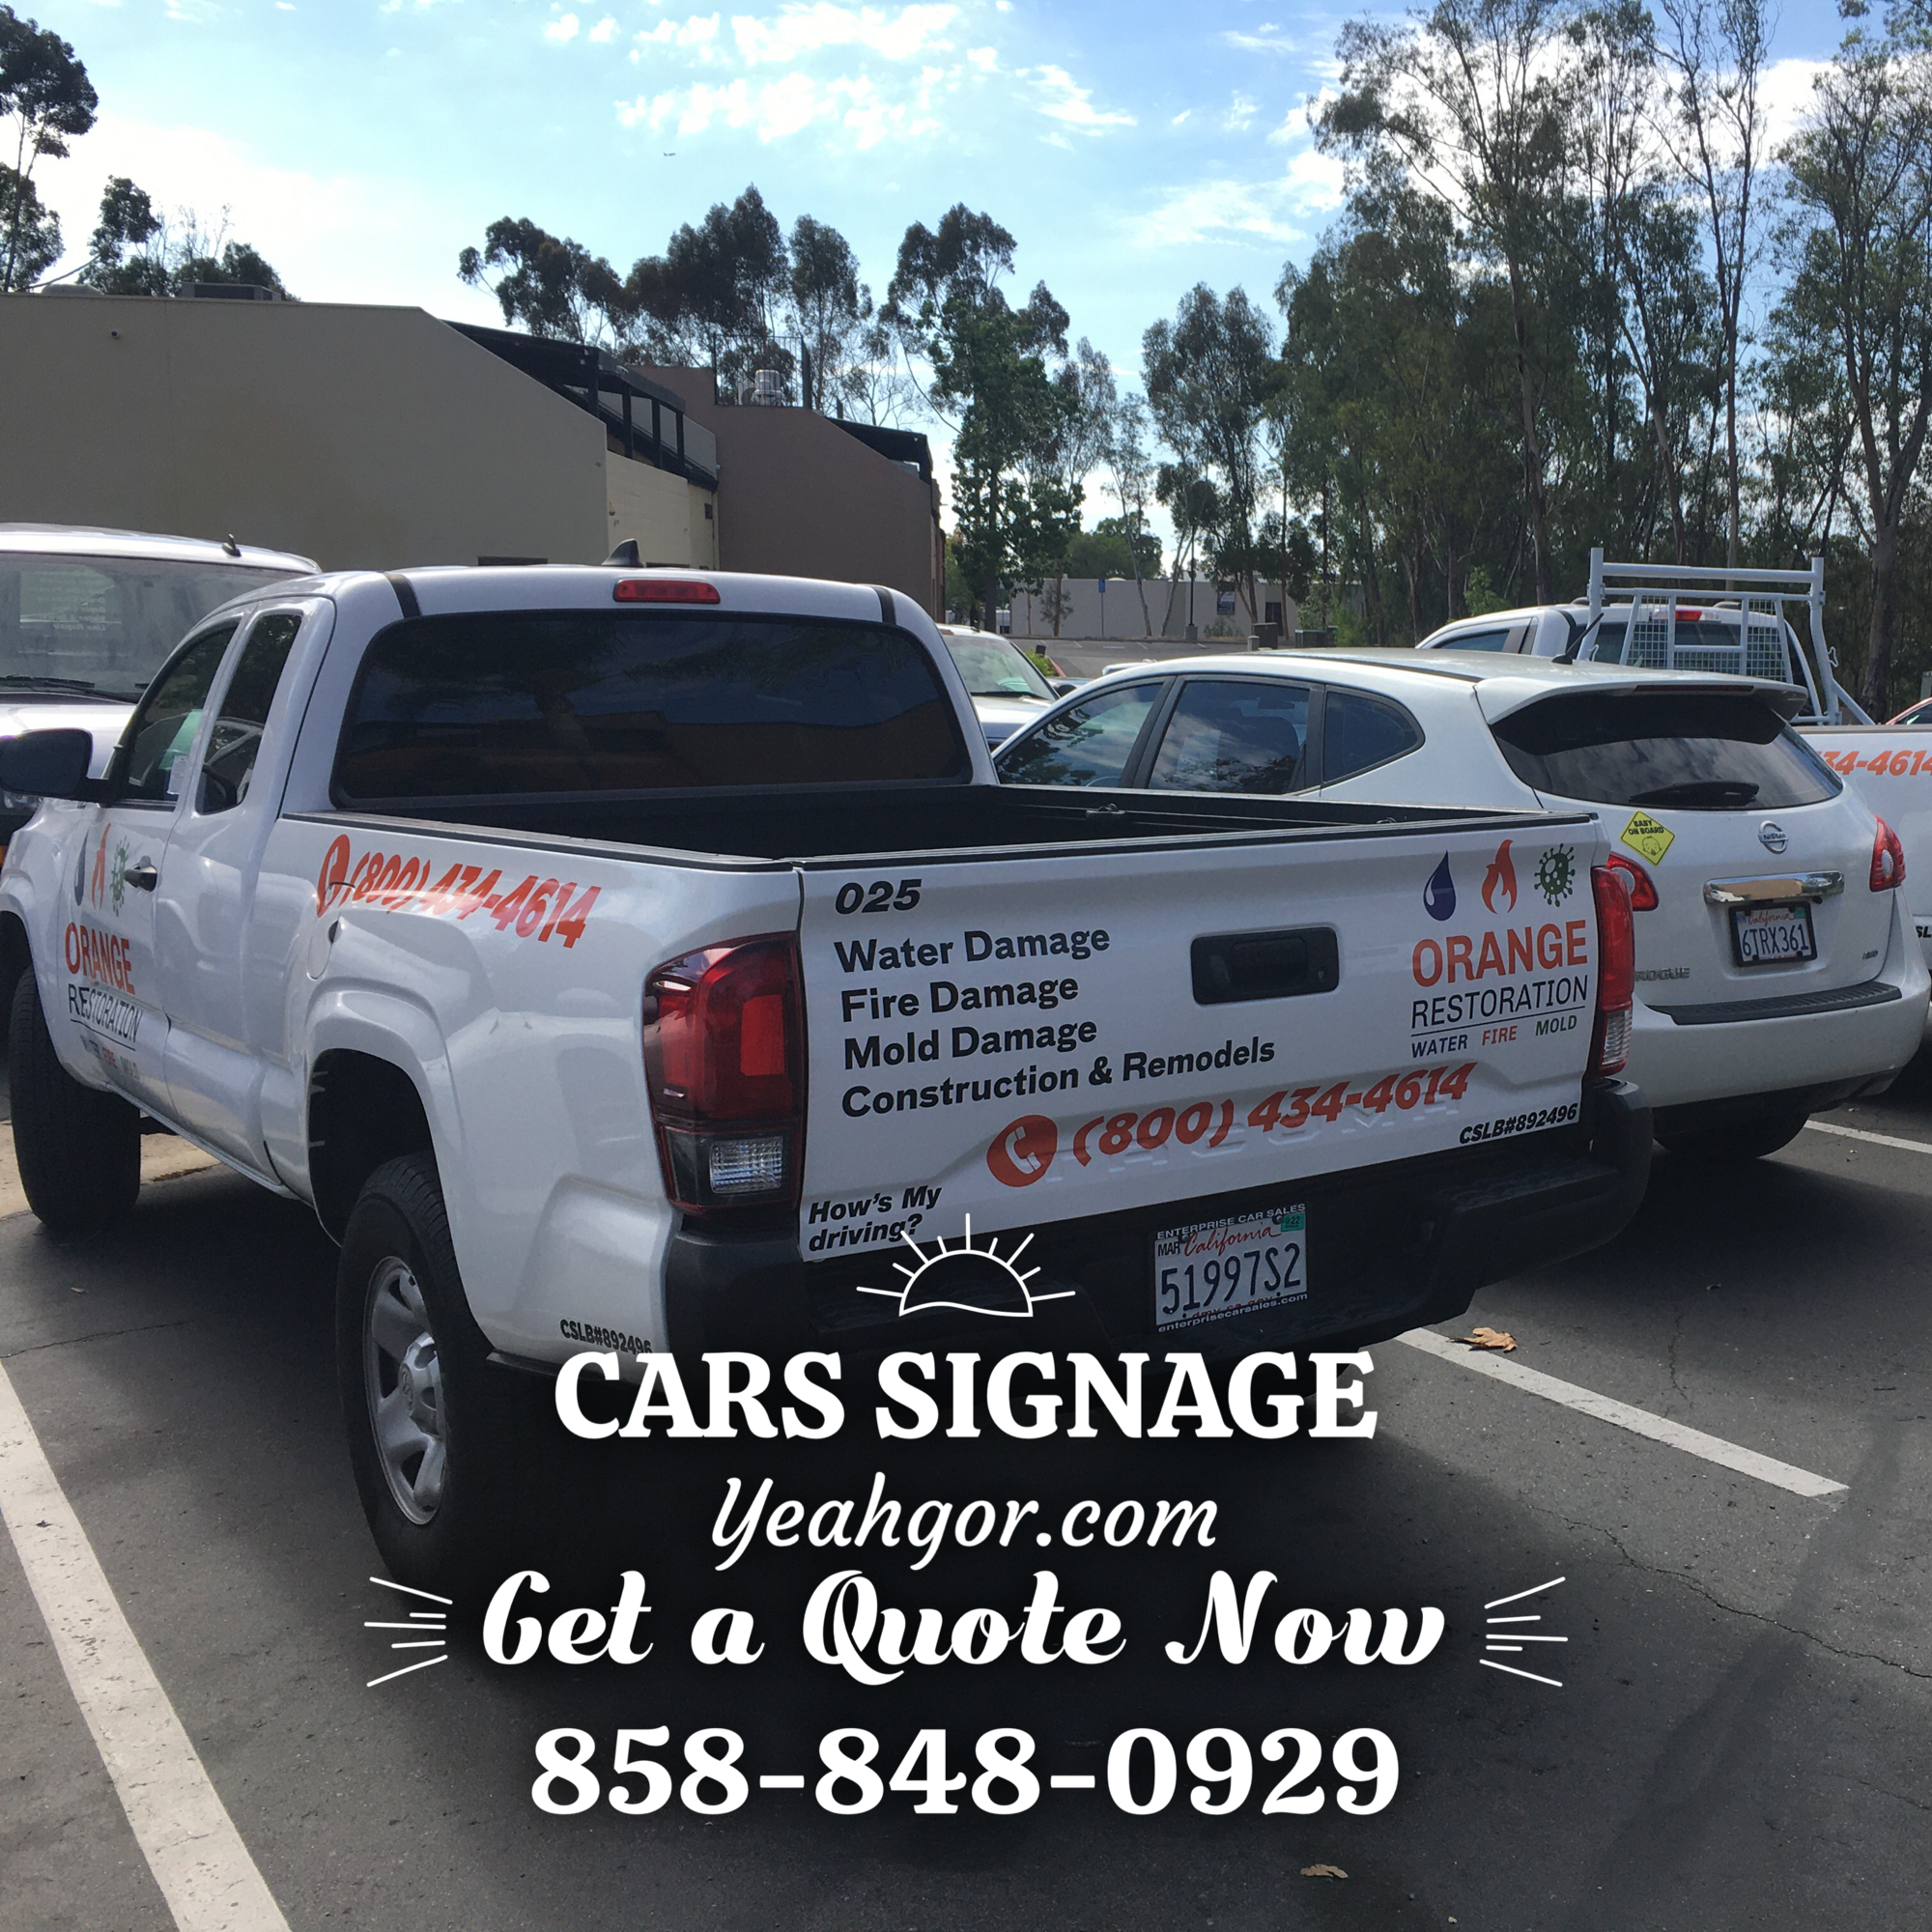 Santee, CA – Vehicle Graphics and Car Signage San Diego for Small Businesses DM for details We do the car signage and vinyl decals for cars, vans, trailers, and trucks.